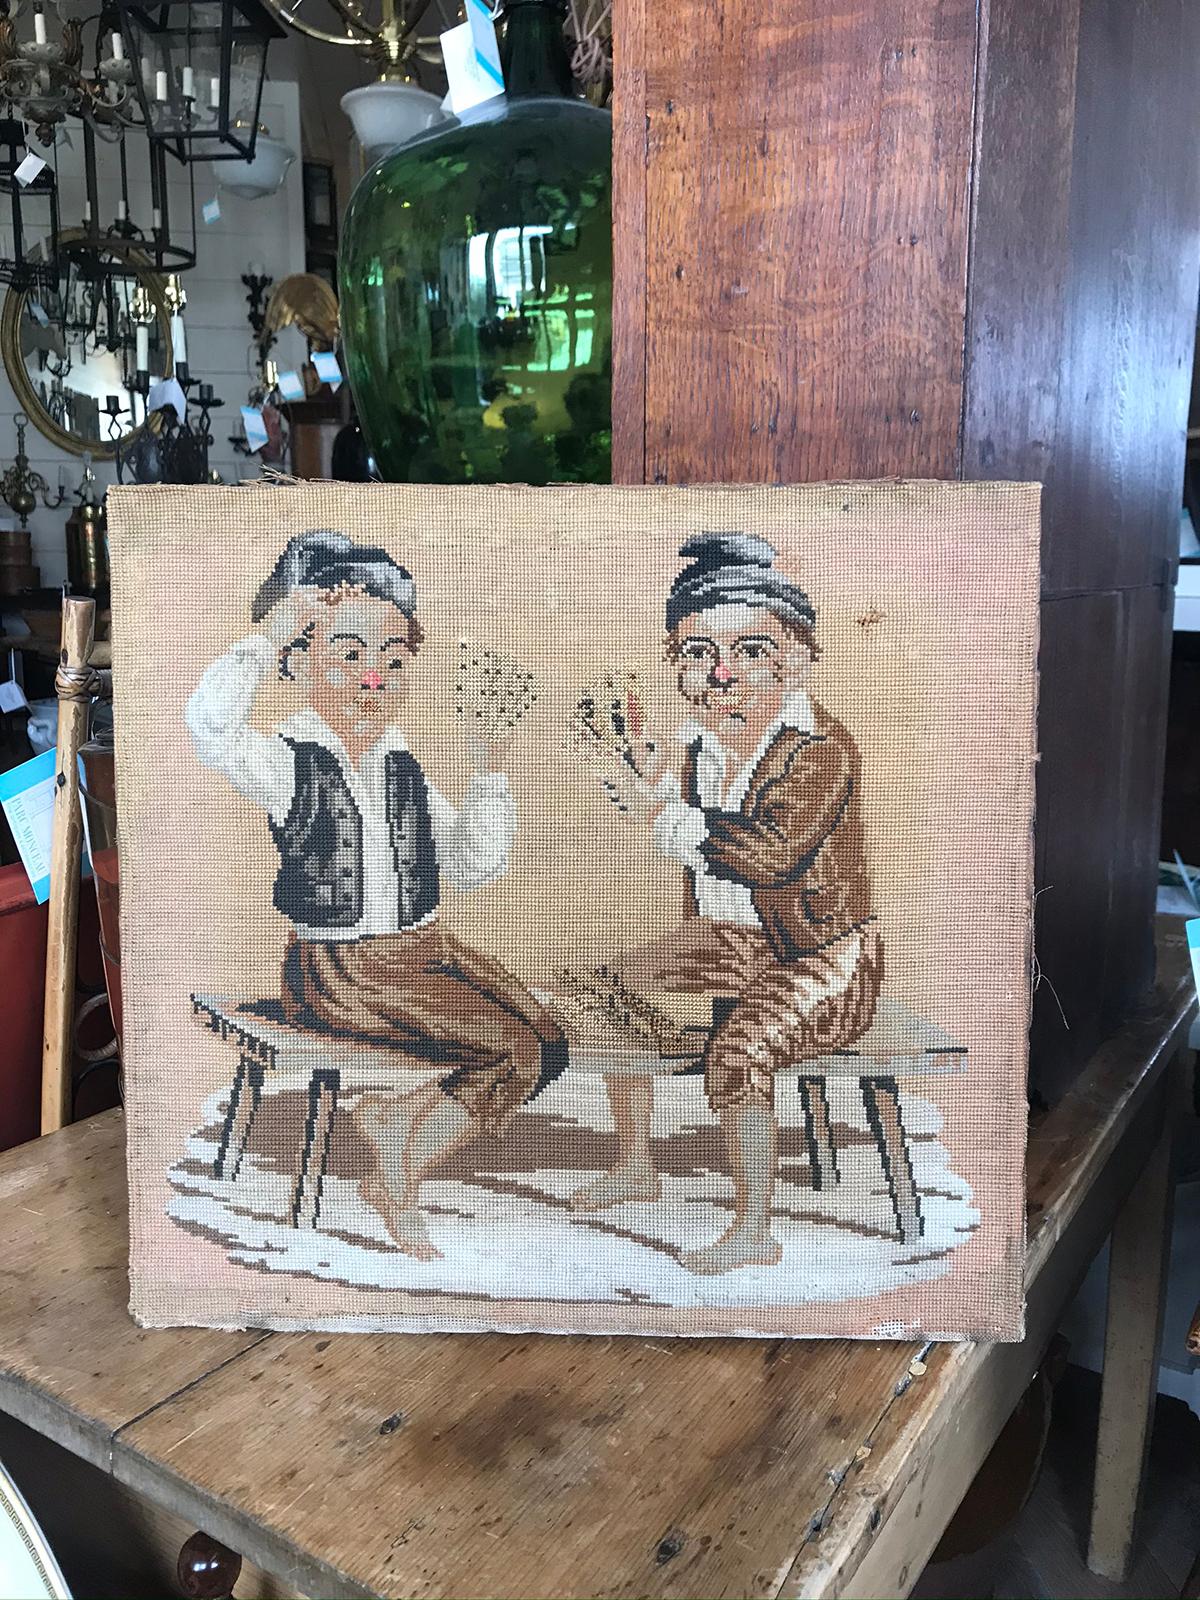 19th-20th century needlepoint of card players, mounted to wood frame.